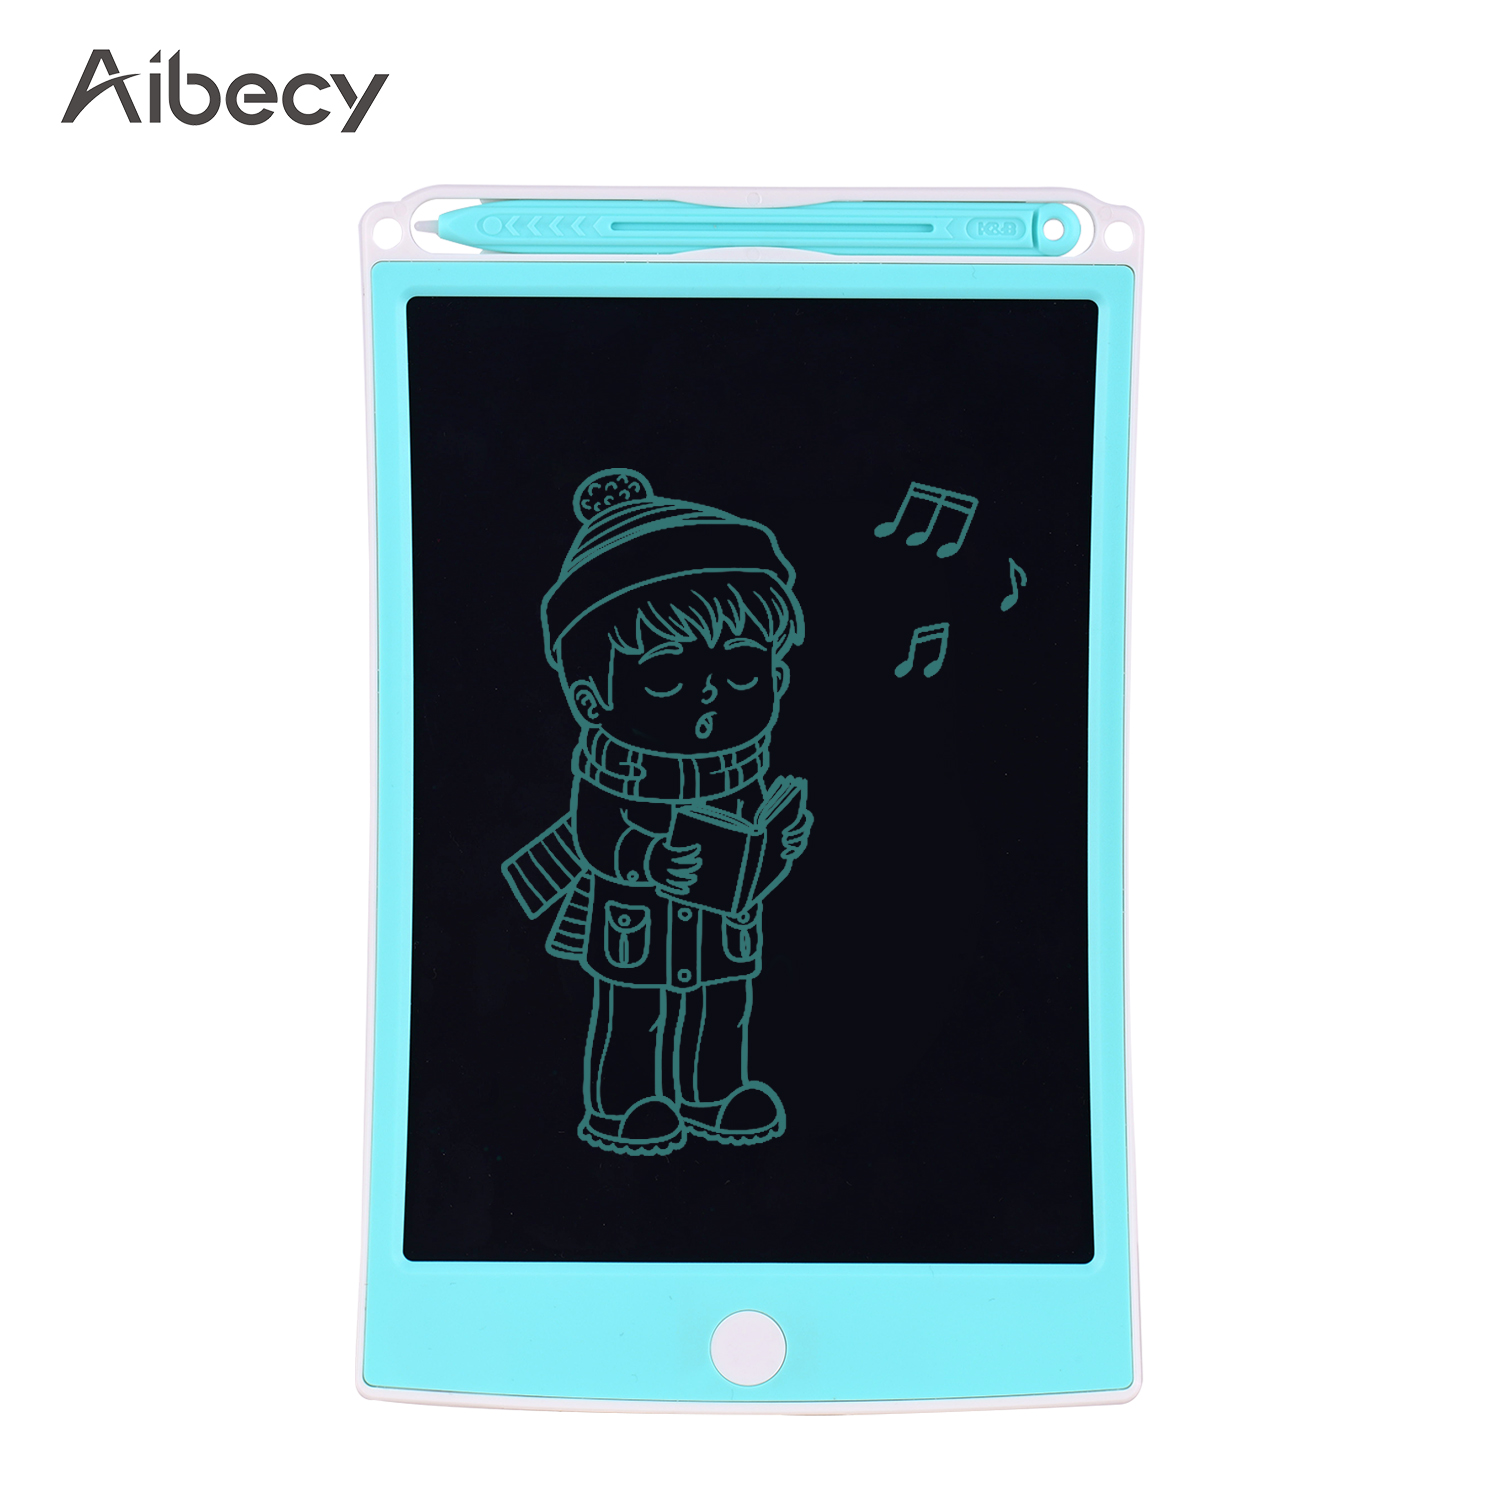 Office School Black 20 Inch LCD Writing Board//Electronic Blackboard//Childrens Drawing Graffiti Board//Suitable for Family